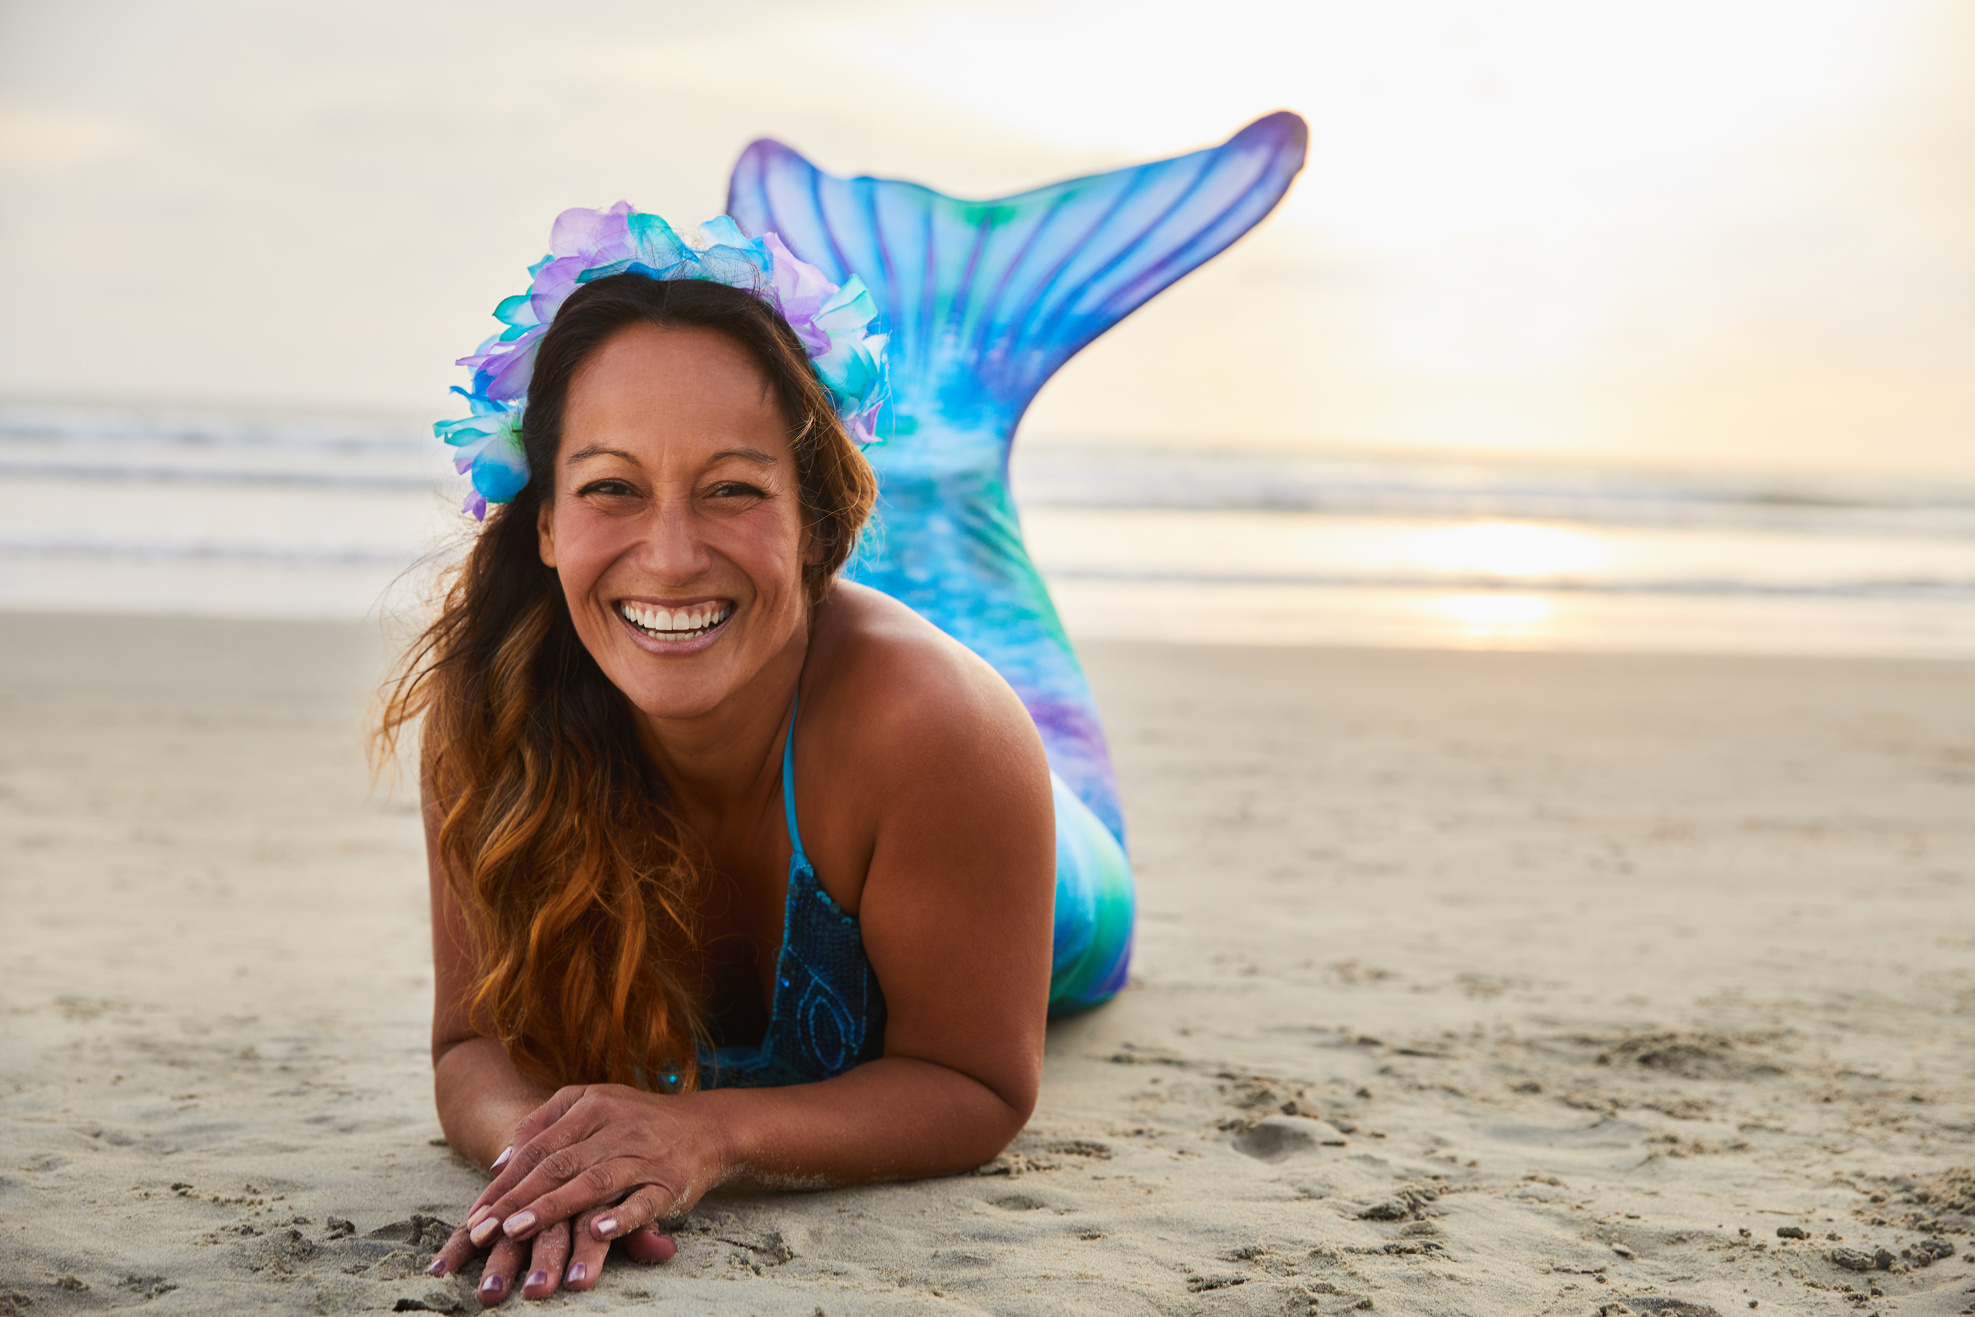 Mature woman in a mermaid costume laughing on a sandy beach